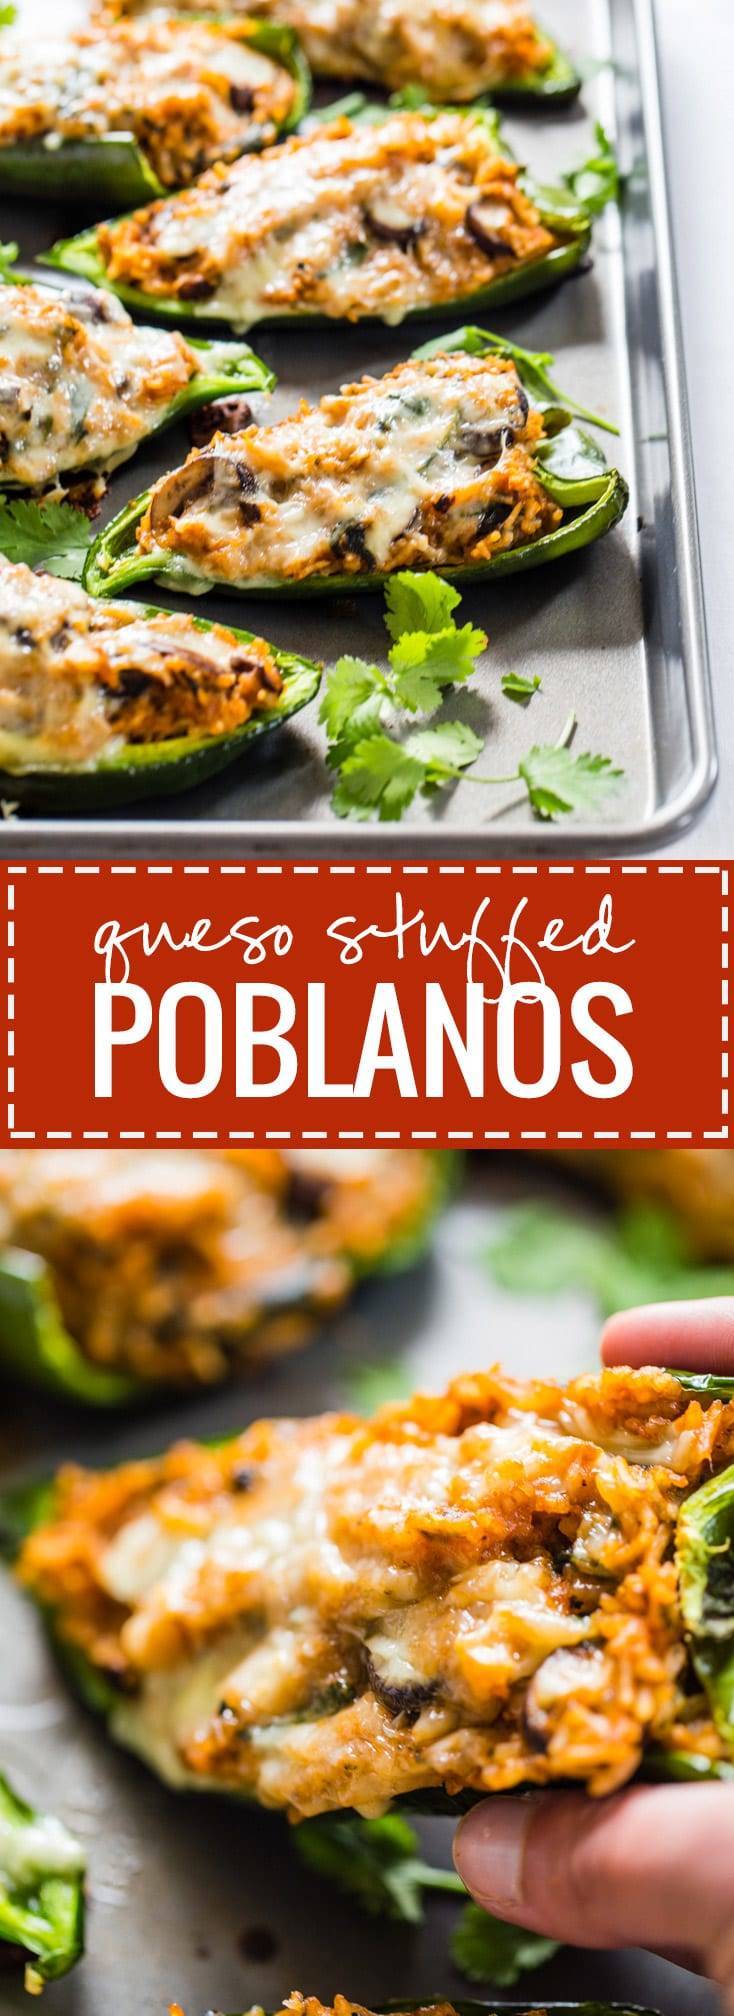 Queso Stuffed Poblanos recipe - adaptable to whatever veggies or protein you have on hand. Easy vegetarian YUMS! pinchofyum.com